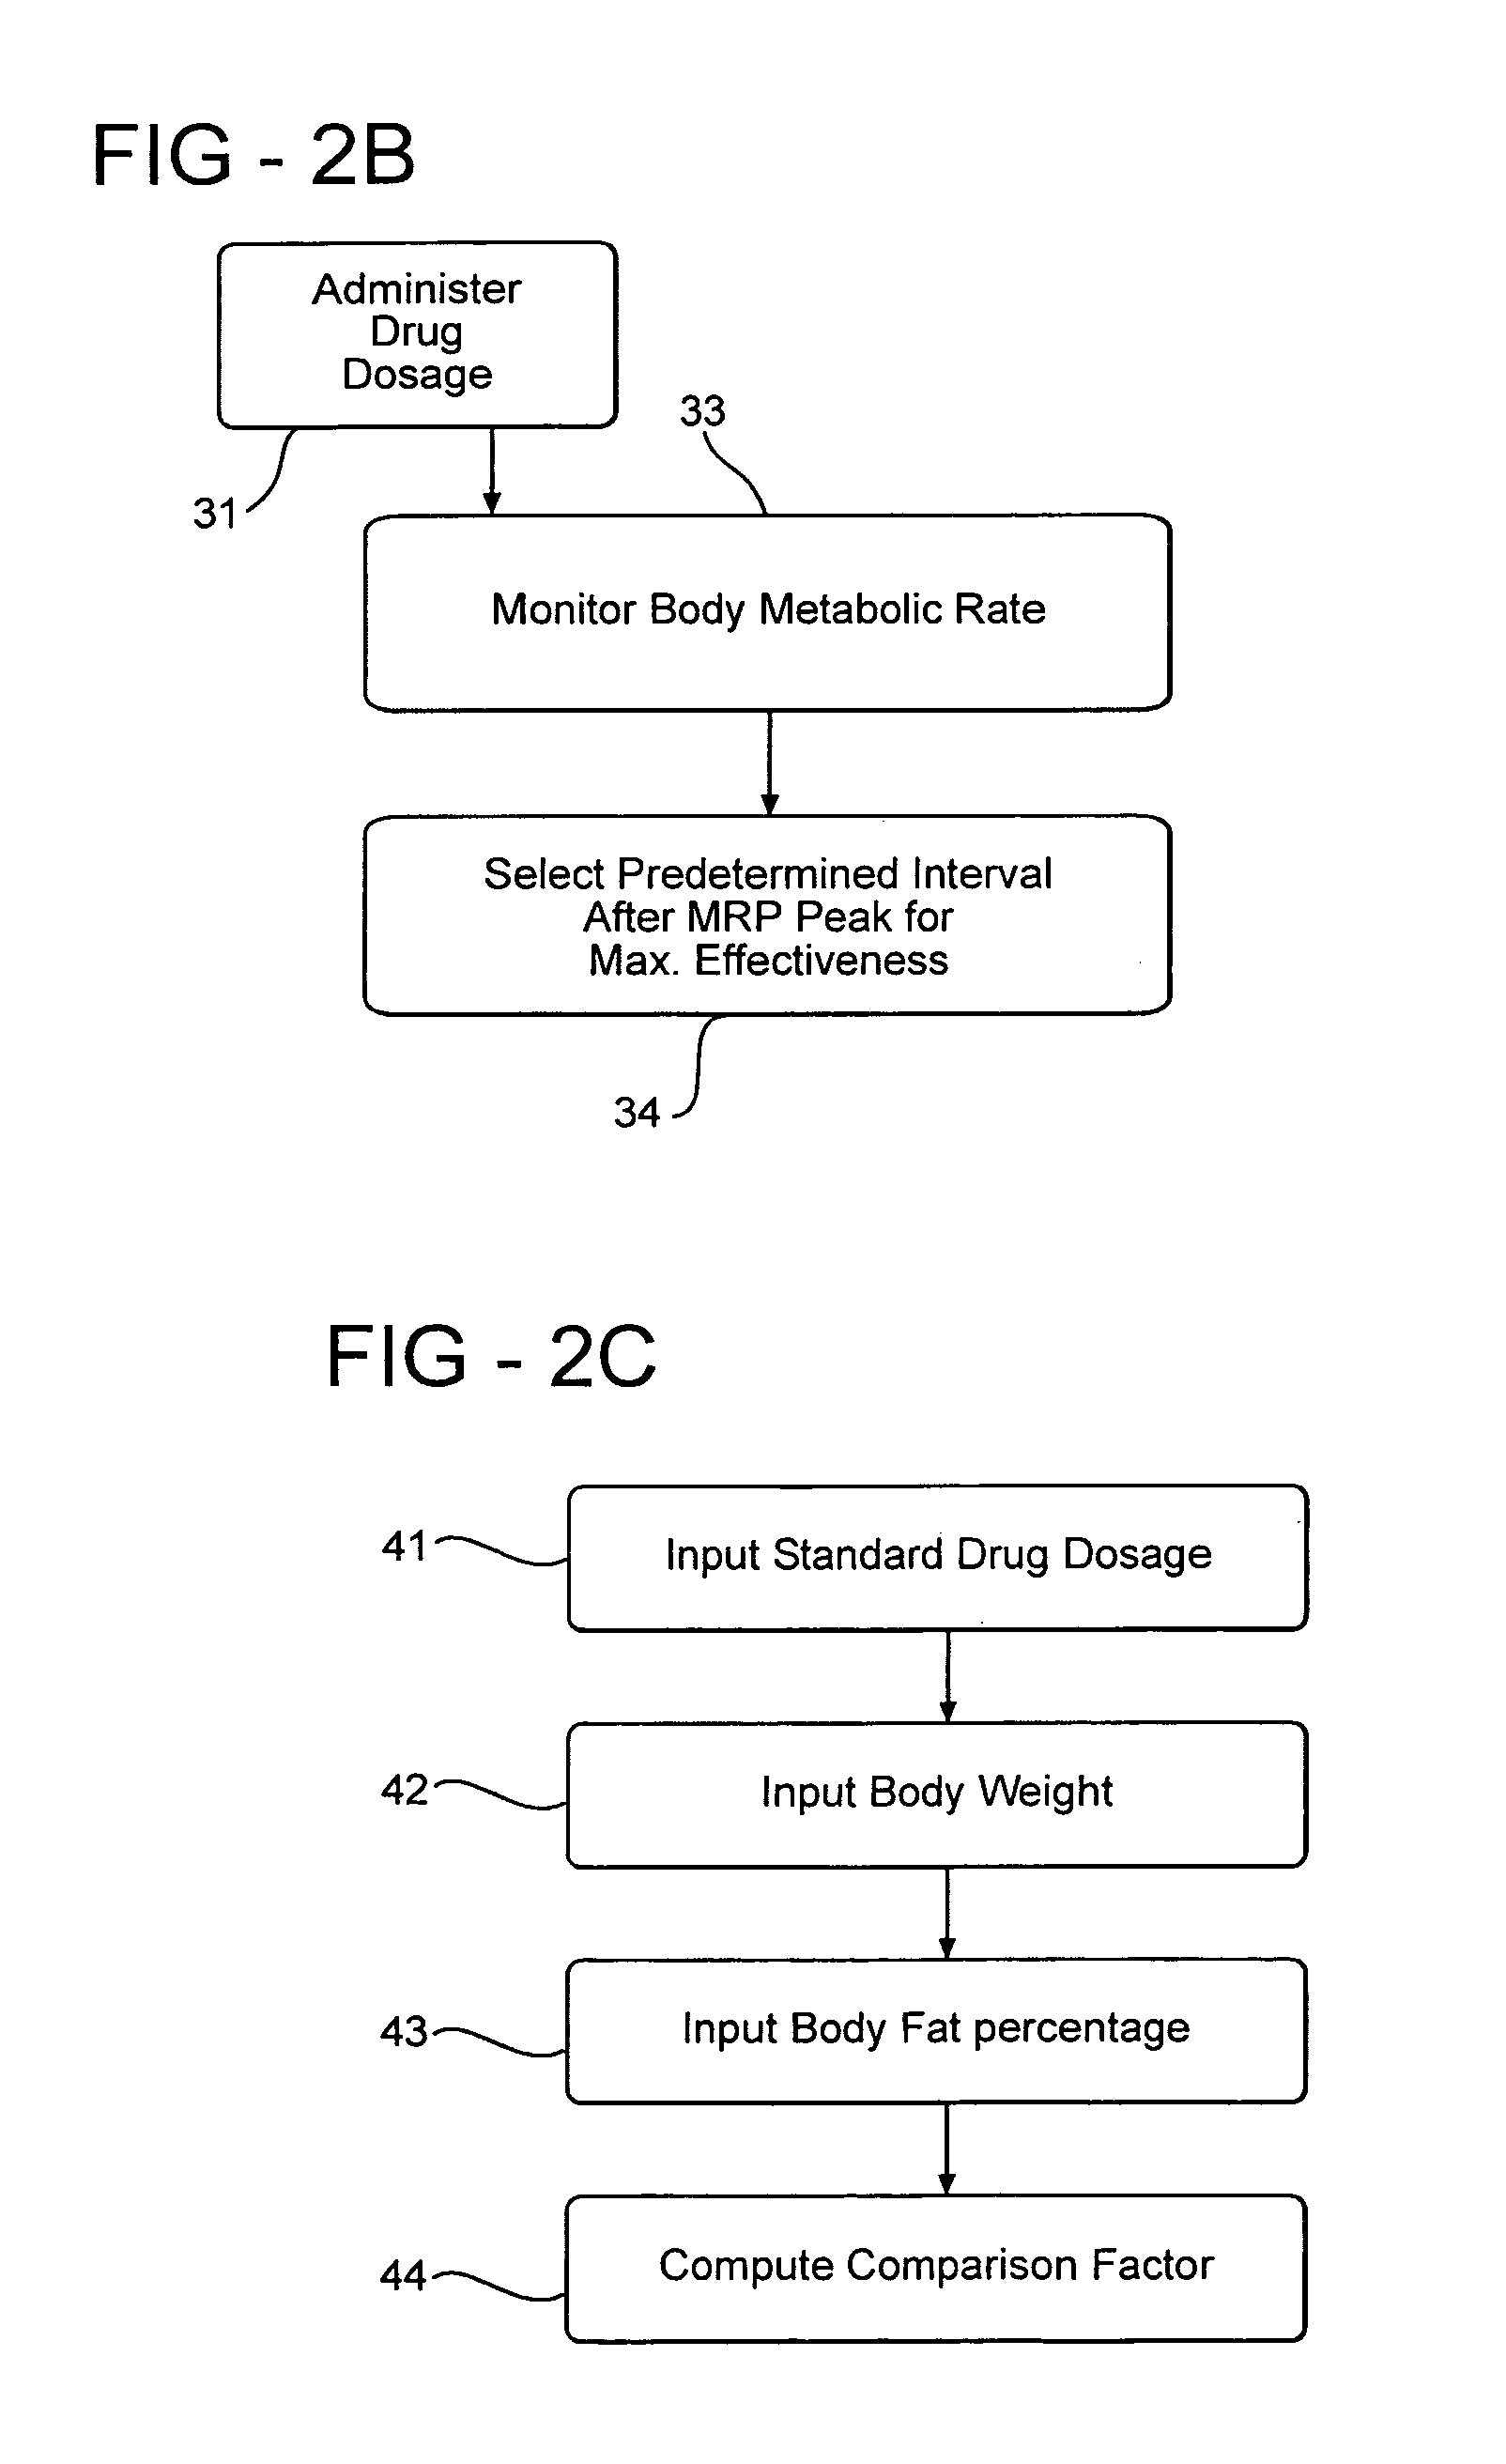 System and method of determining an individualized drug administration protocol